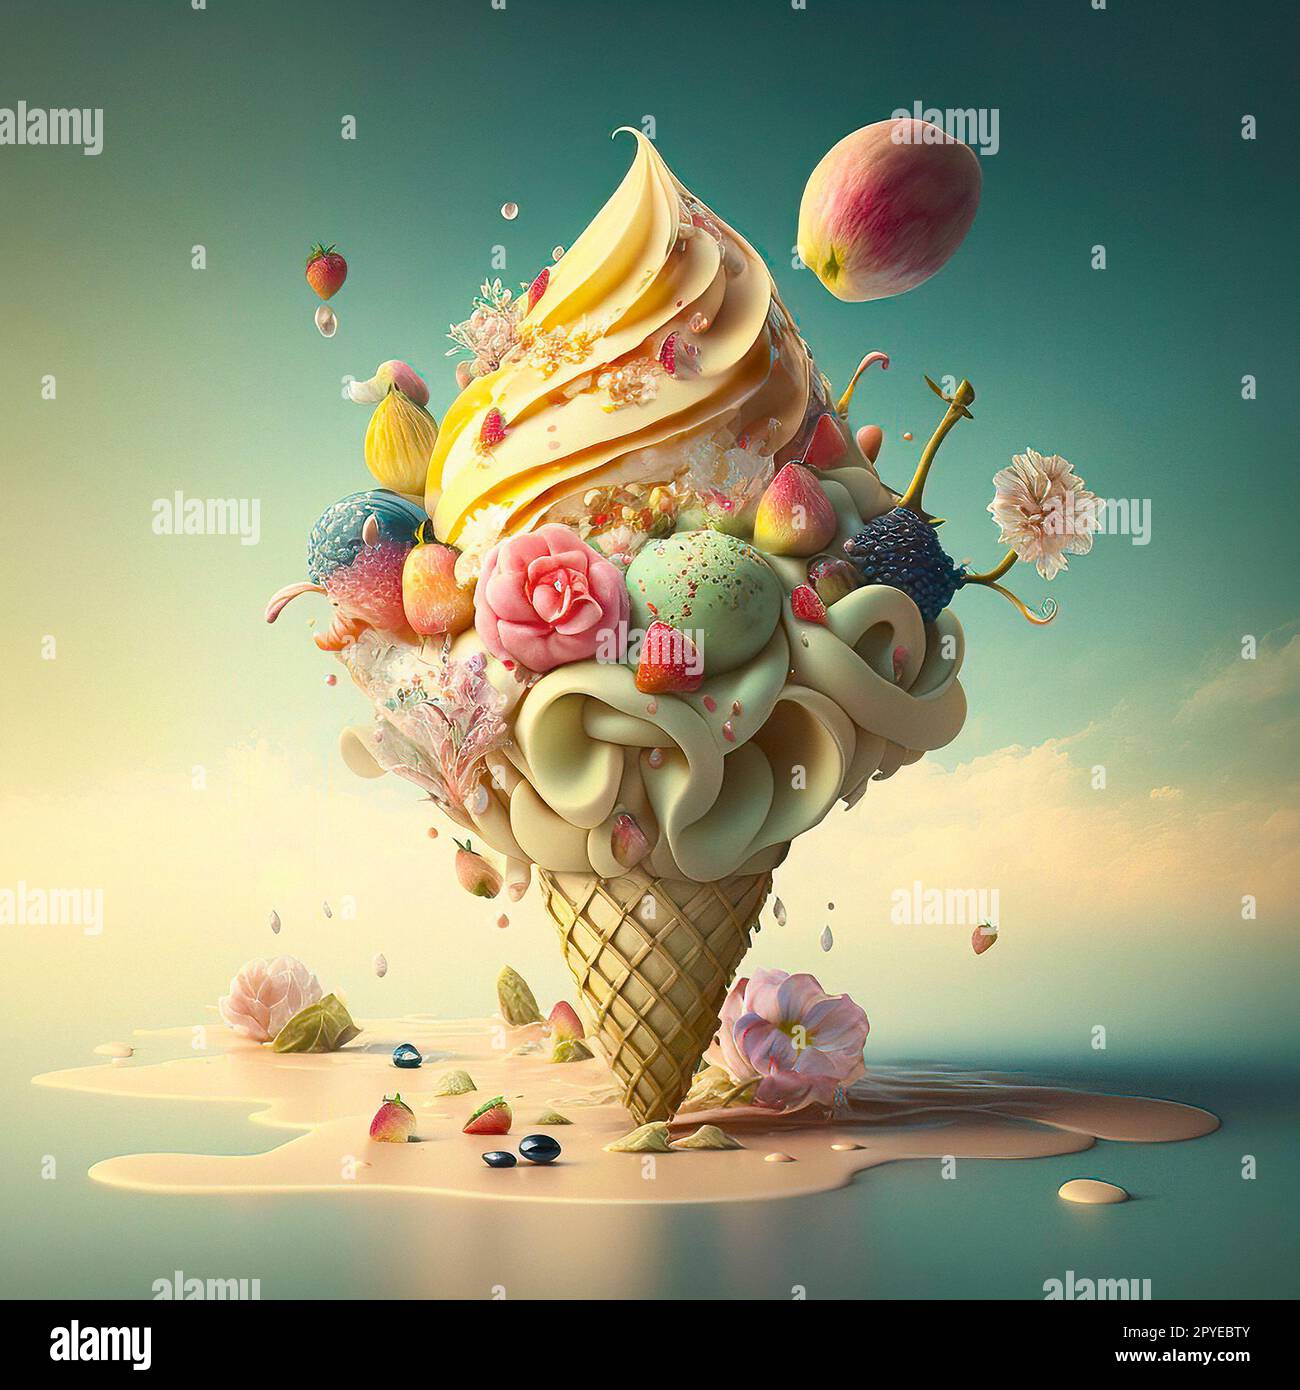 A Colorful Ice Cream Cone with Mouthwatering Toppings and Fruits on A Pastel Yellow-Green Background, with Melted Ice Cream around it Stock Photo